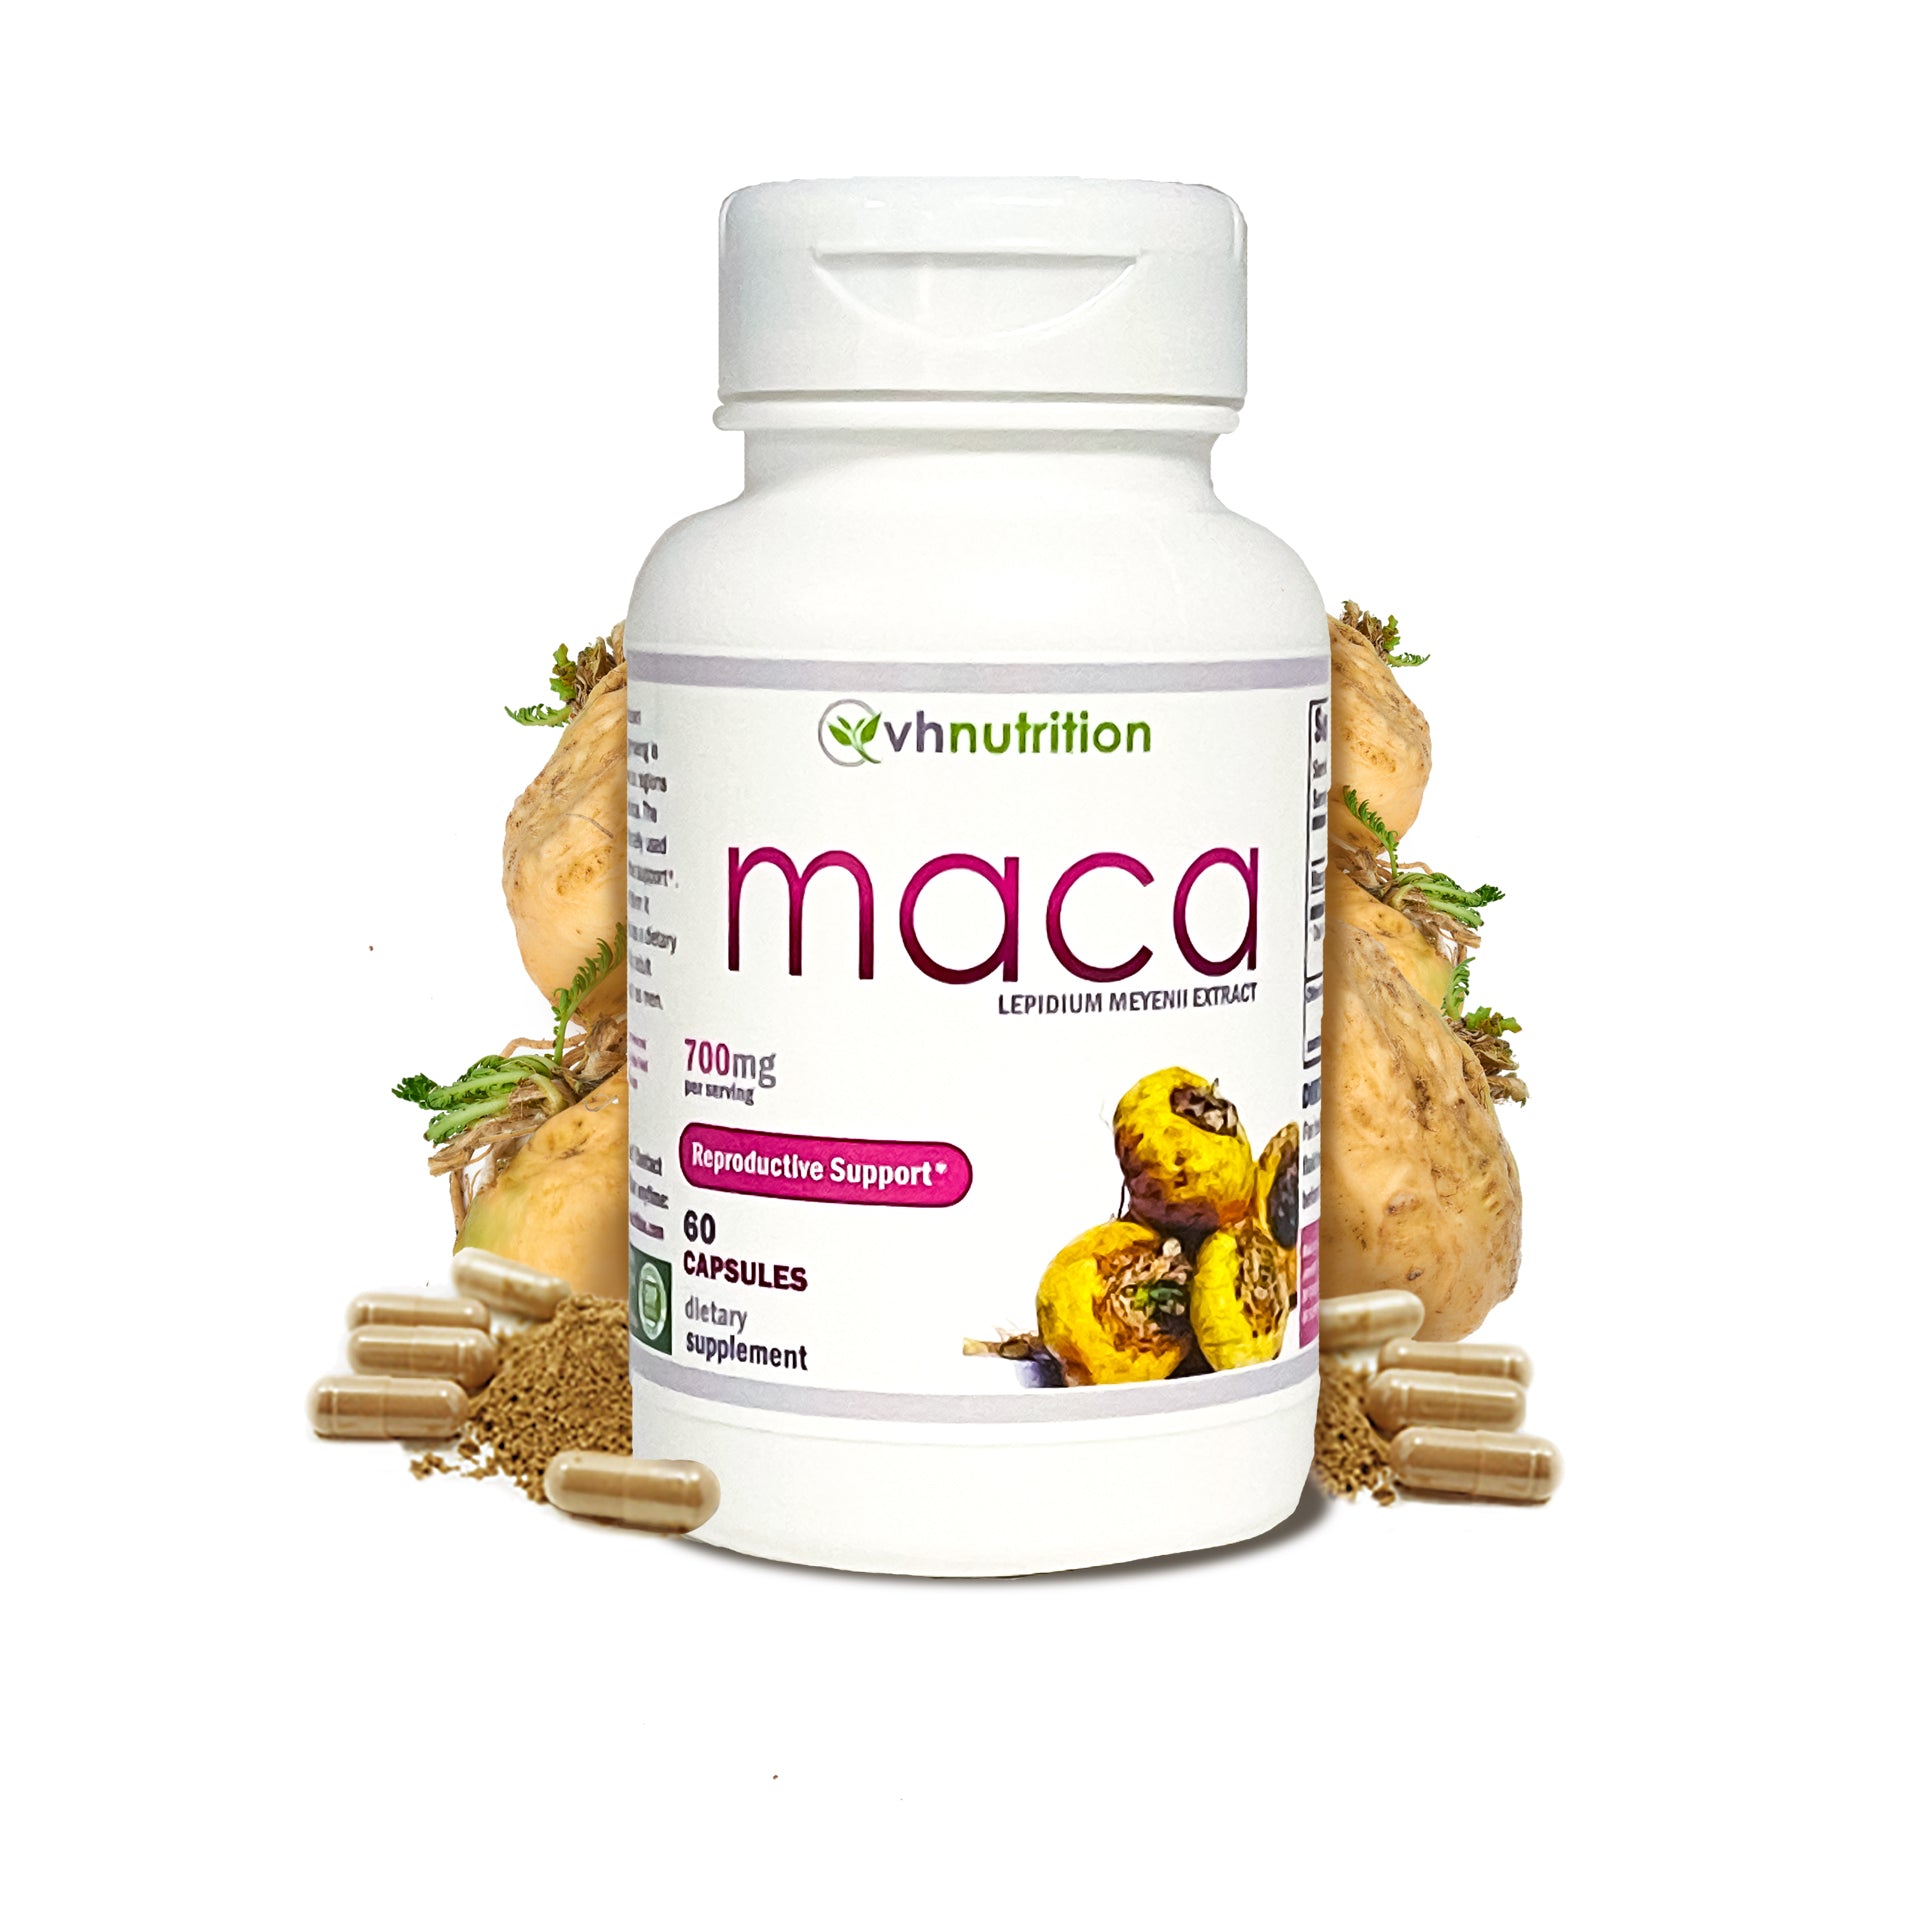 VH Nutrition FEM BOOST STACK | Natural Hormonal, Mood & Reproductive Support* | Shatavari, Maca, Dong Quai | 25% OFF our Regular Price